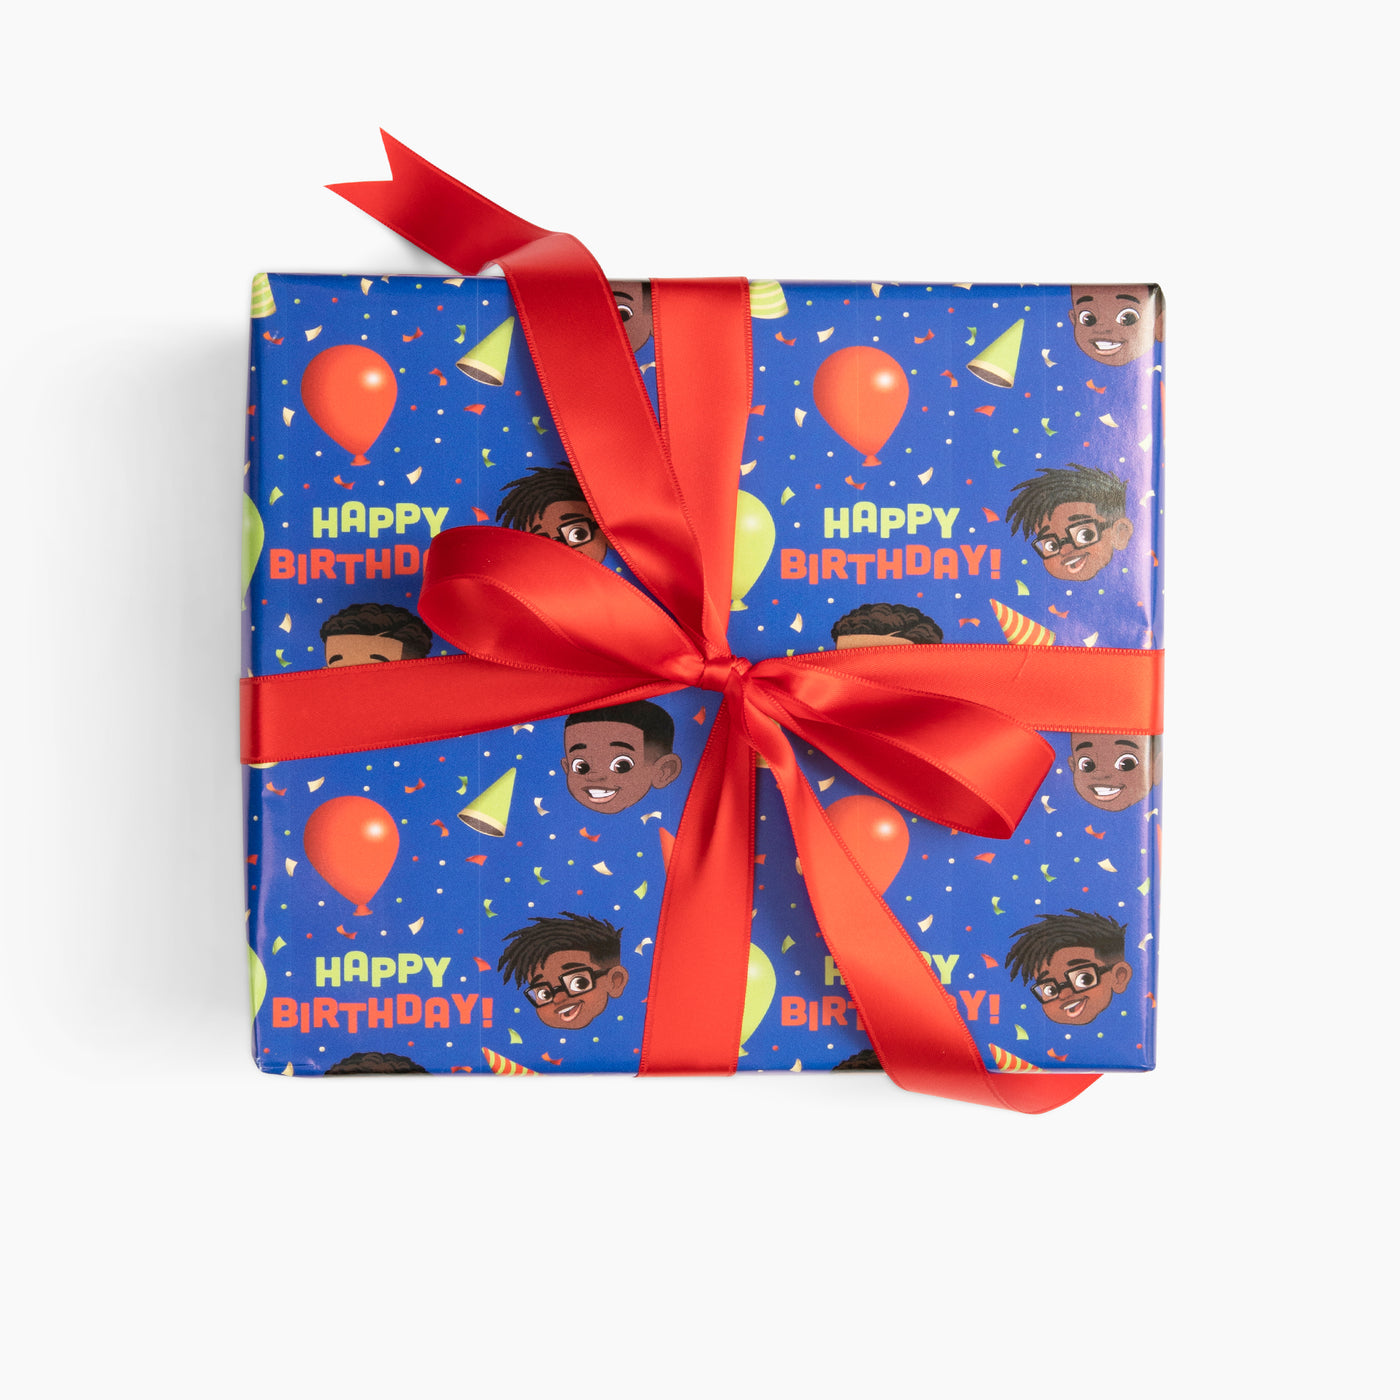 Happy Birthday! Red Balloons Gift Wrap